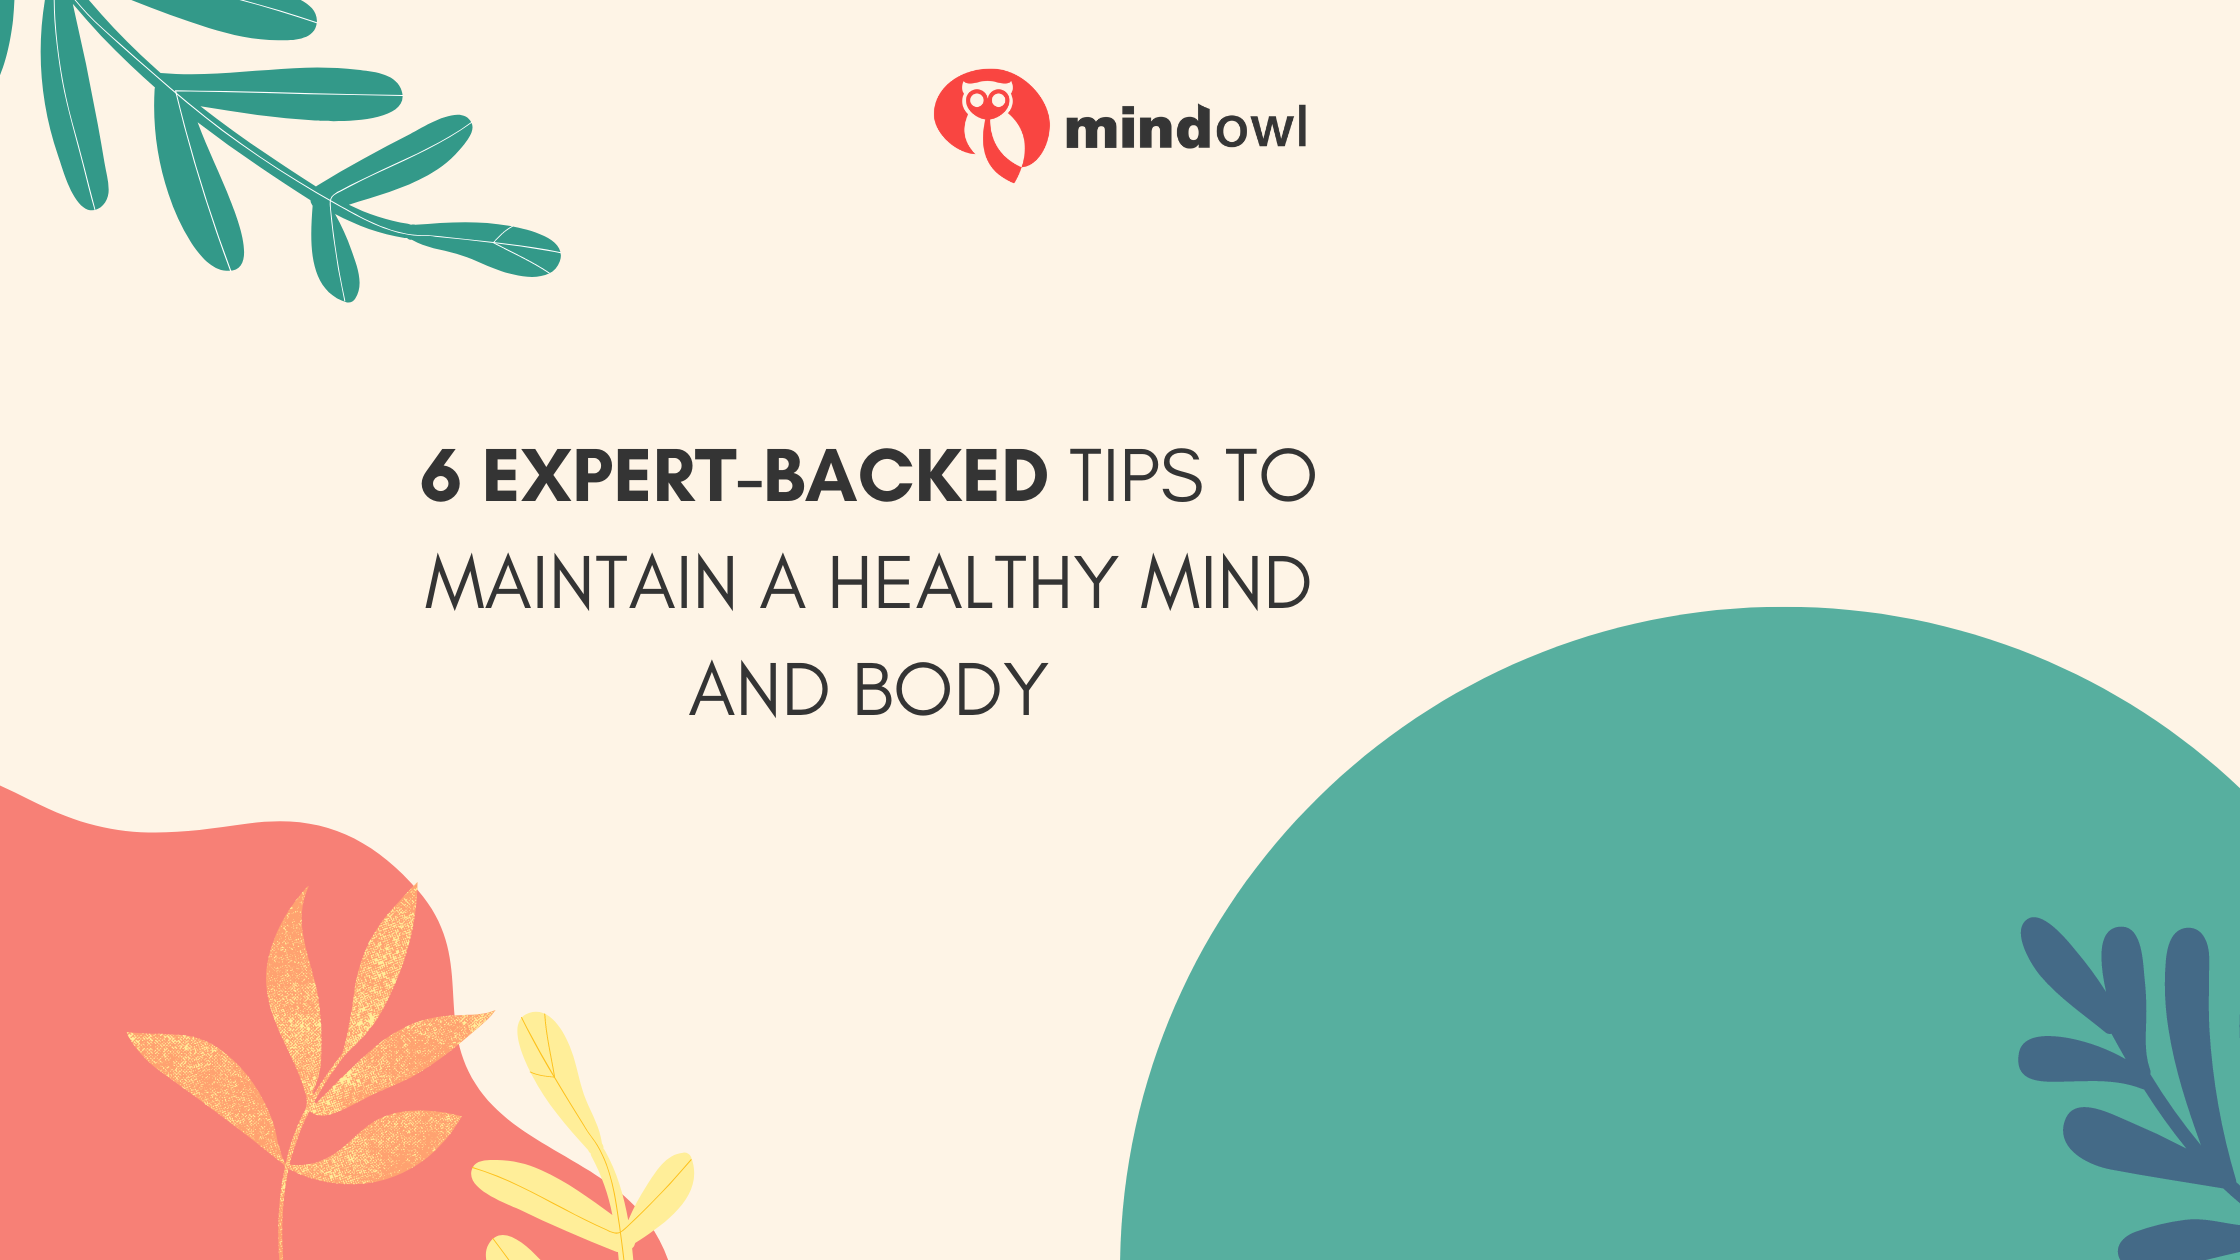 6 Expert-Backed Tips to Maintain a Healthy Mind and Body